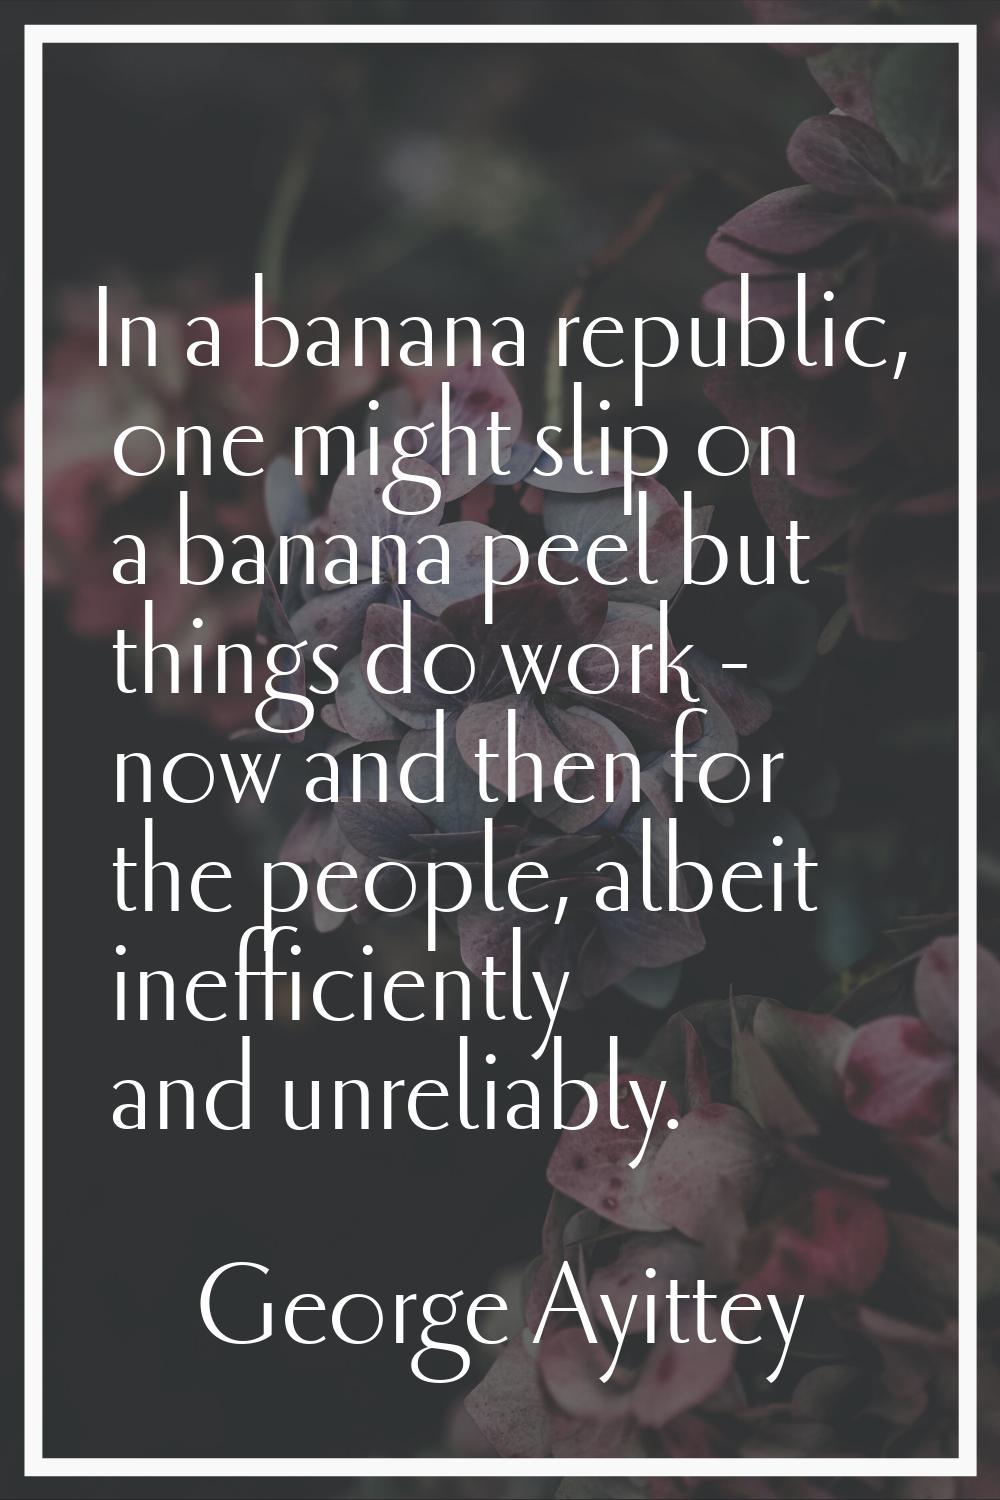 In a banana republic, one might slip on a banana peel but things do work - now and then for the peo